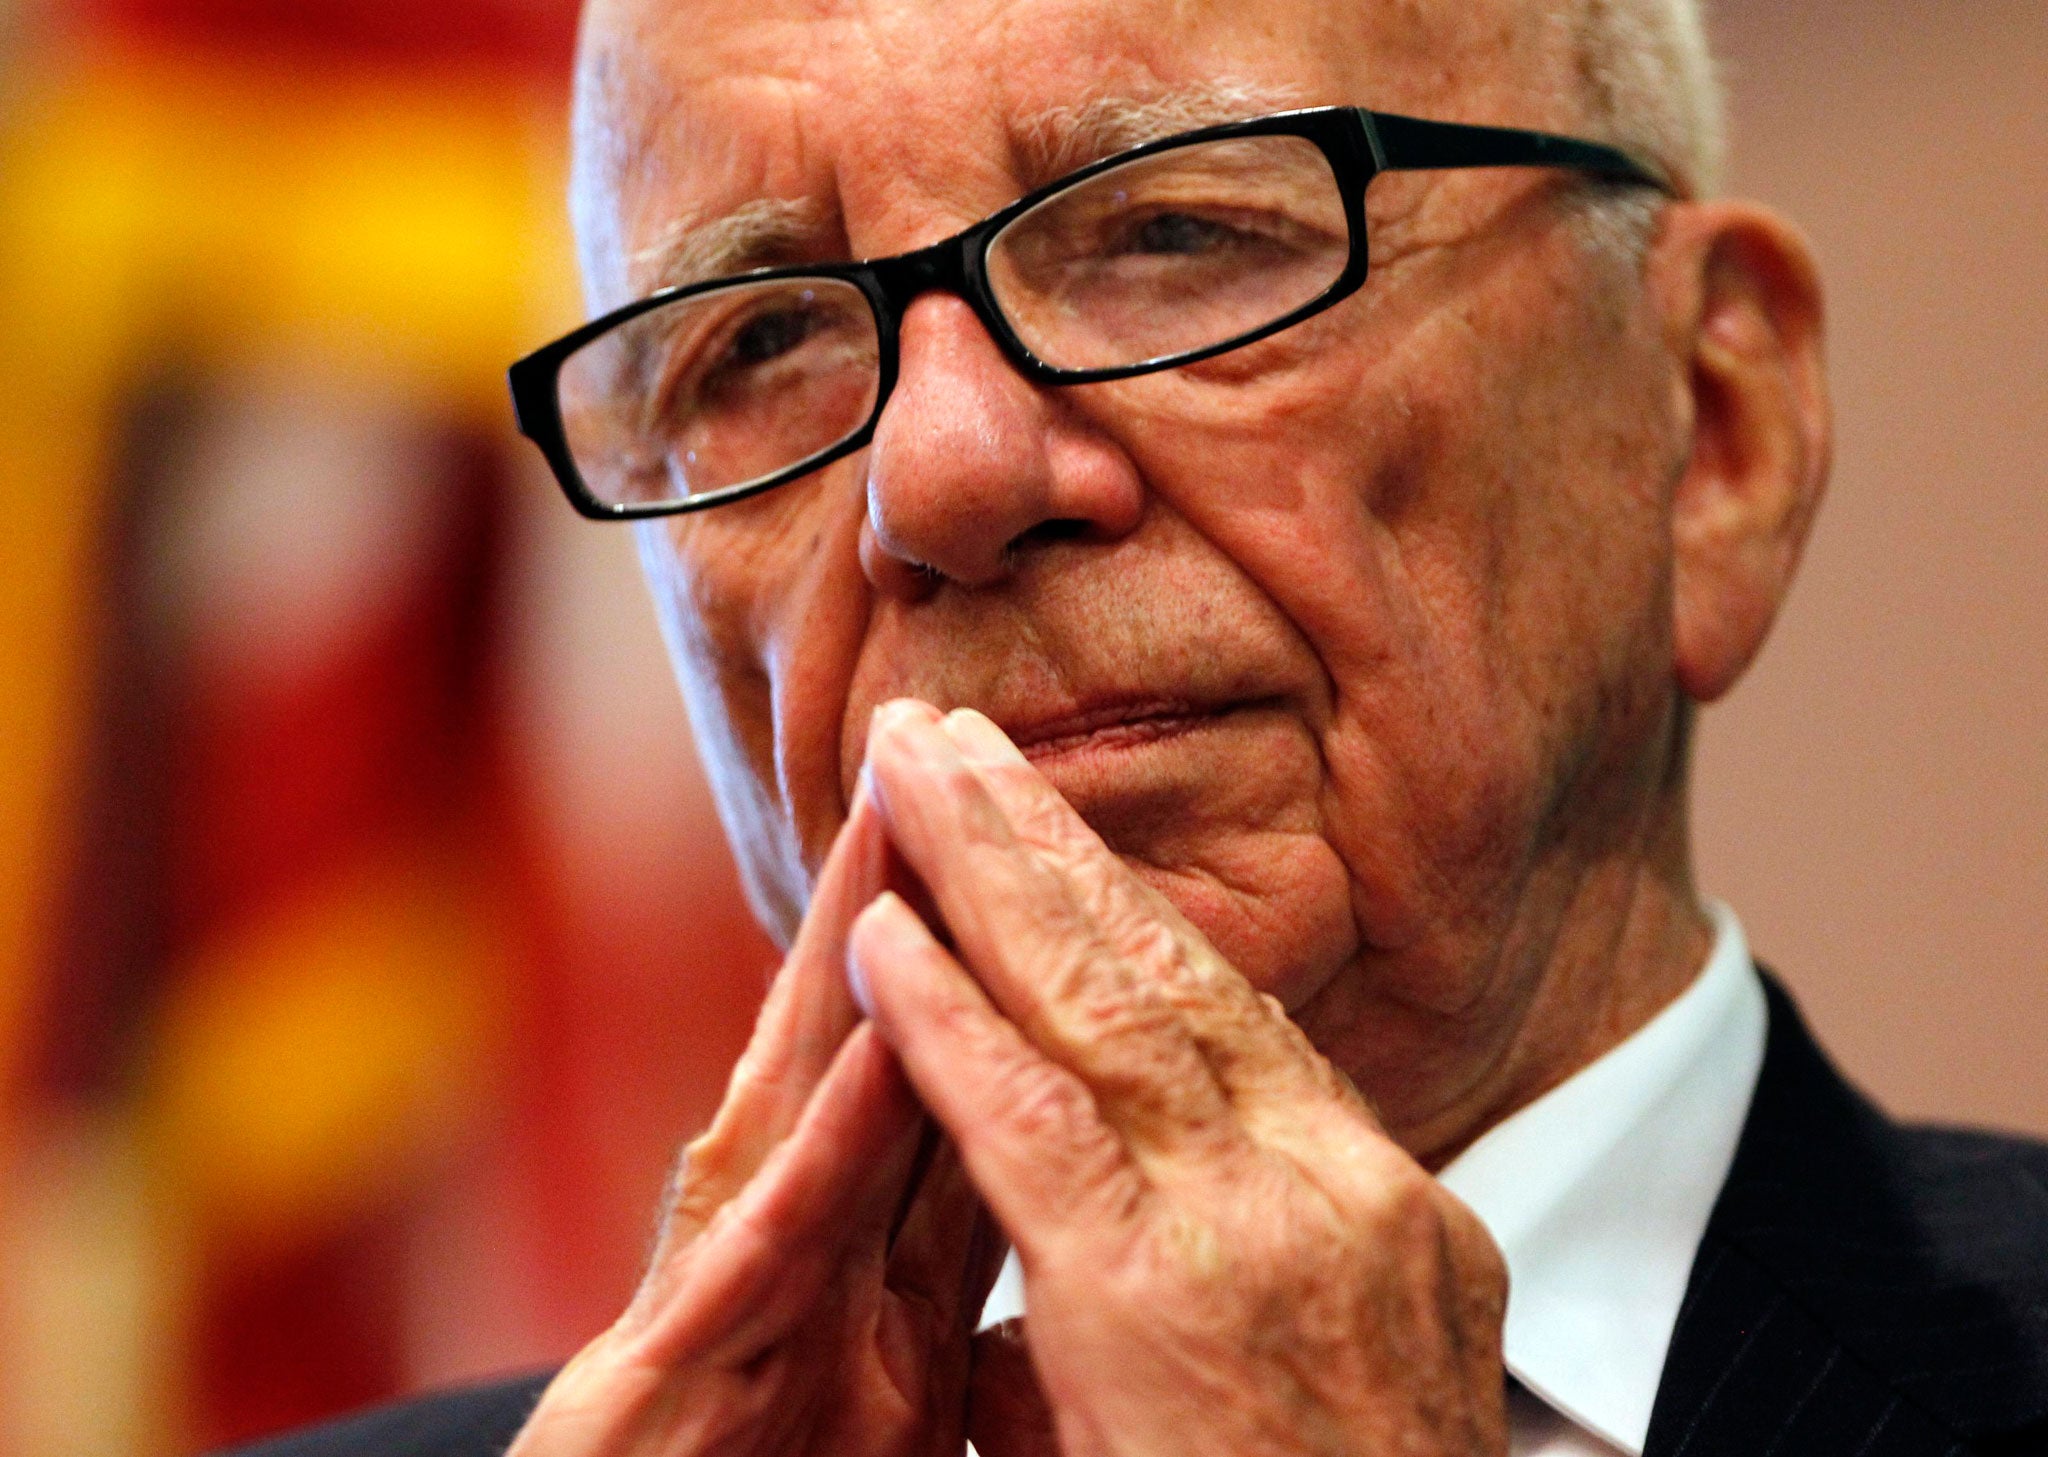 Turning the page? Rupert Murdoch